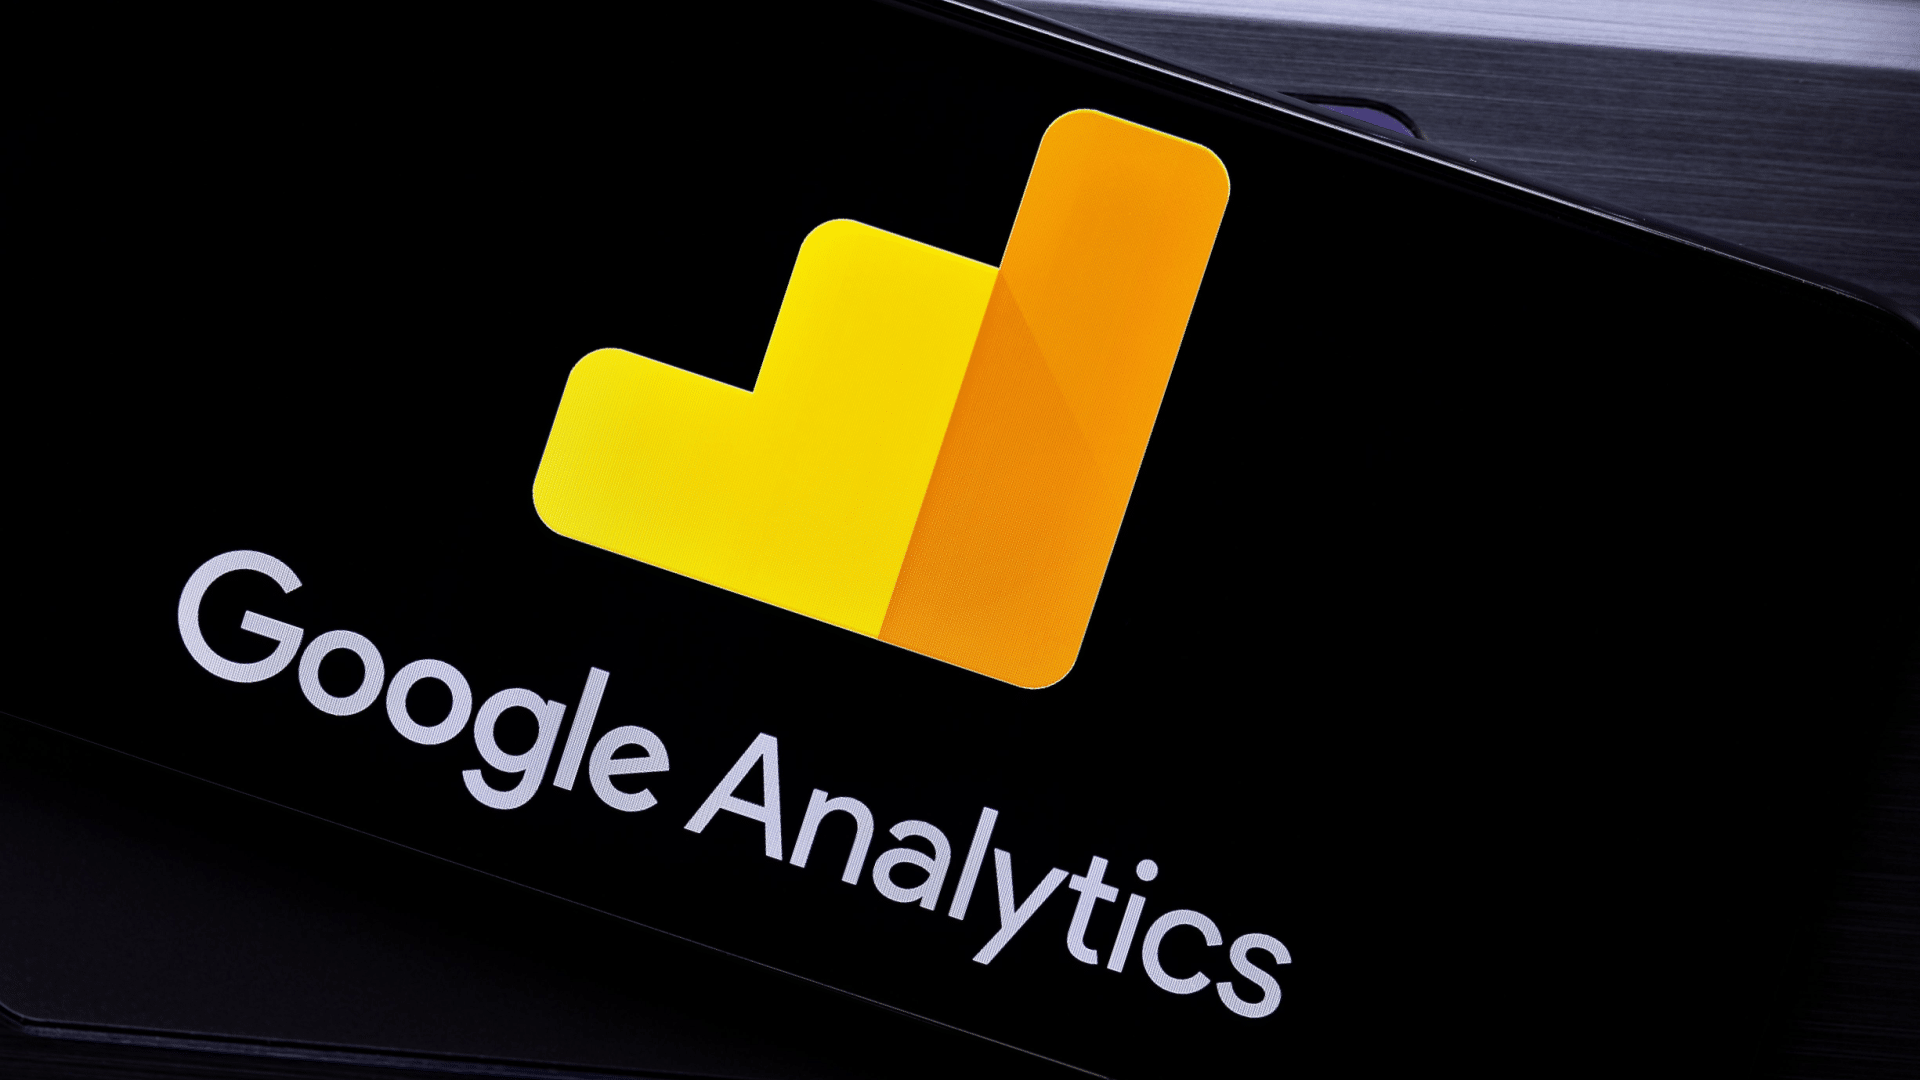 Google Analytics launches new Audience report